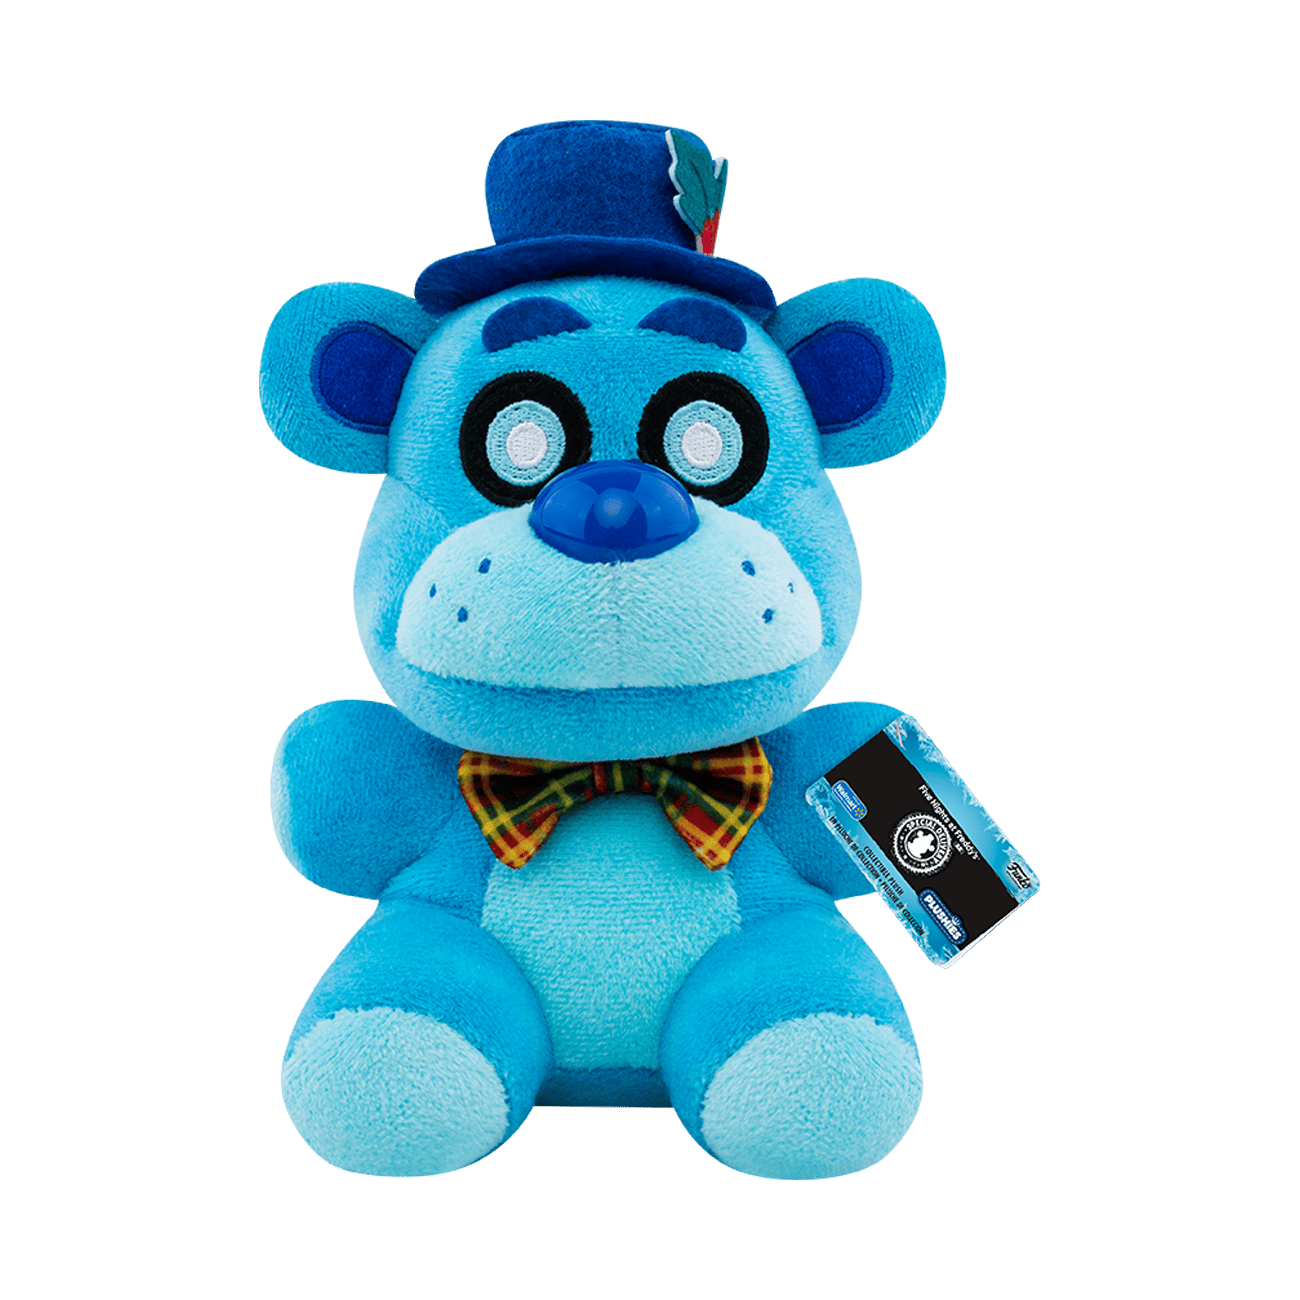 trying to find golden freddy plush｜TikTok Search